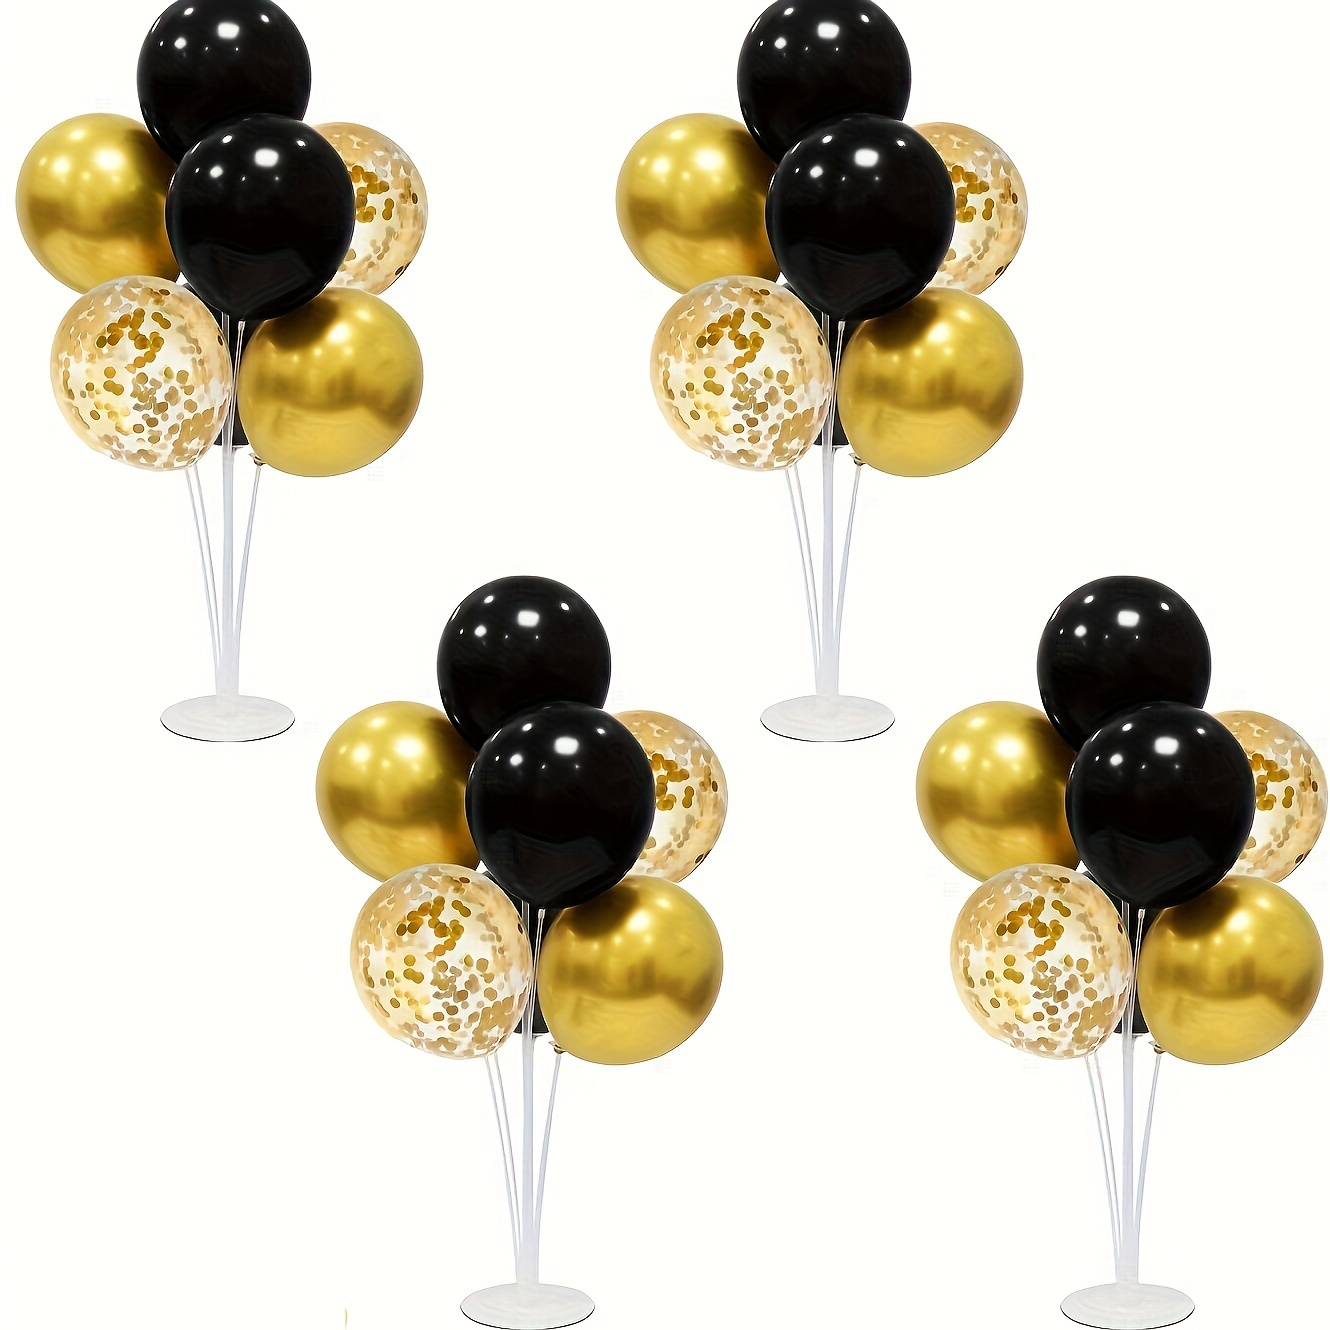 

Set, 12 Inches Black Gold Latex Balloons Glitter Balloons Stand Table Balloon Centerpiece Wedding Birthday Christmas Party Holiday Celebration Decoration Supplies